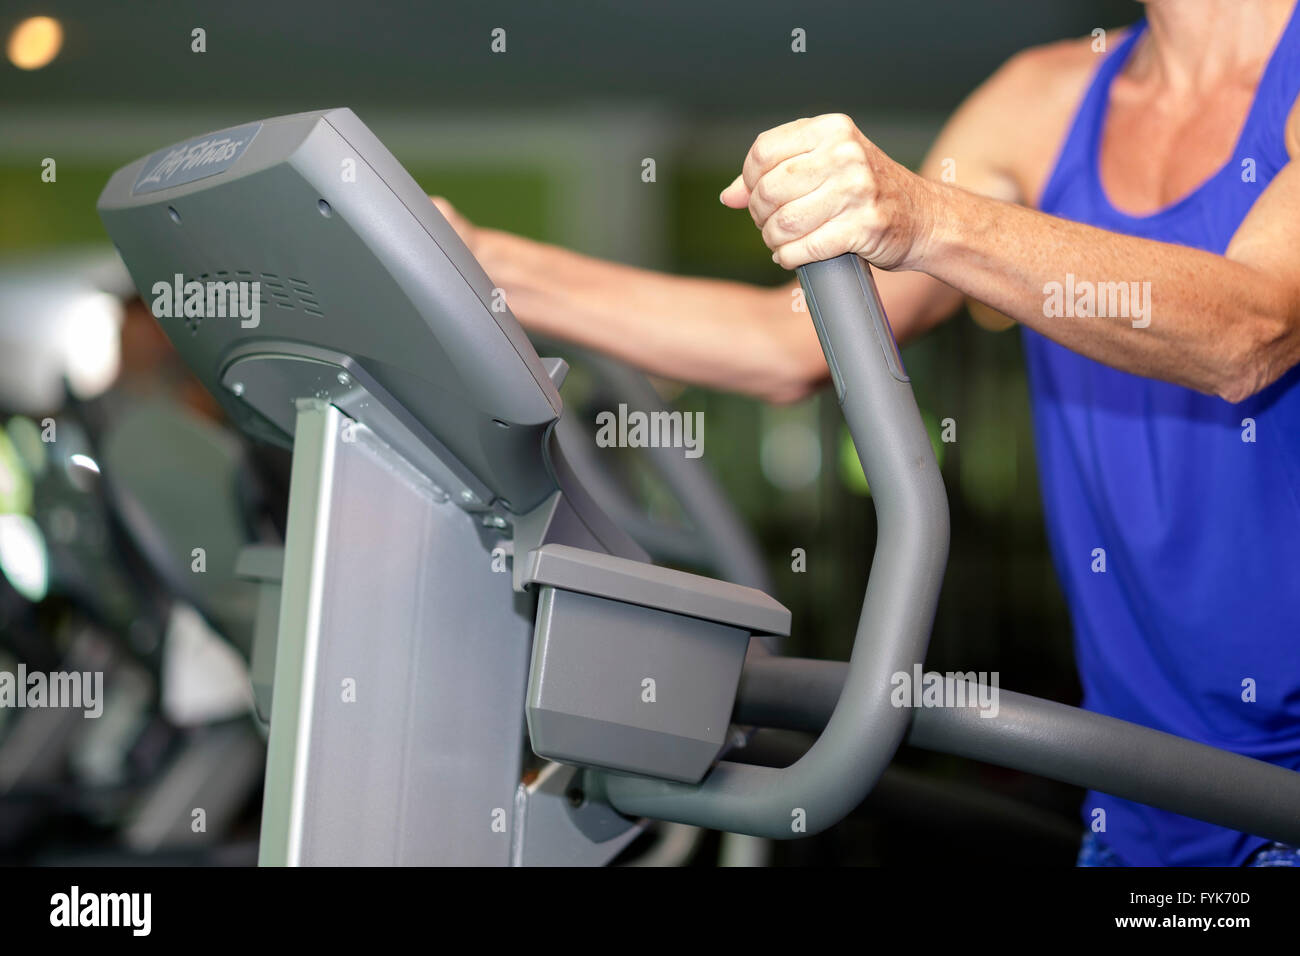 Mature woman exercising on elliptical stepper at a gym Stock Photo